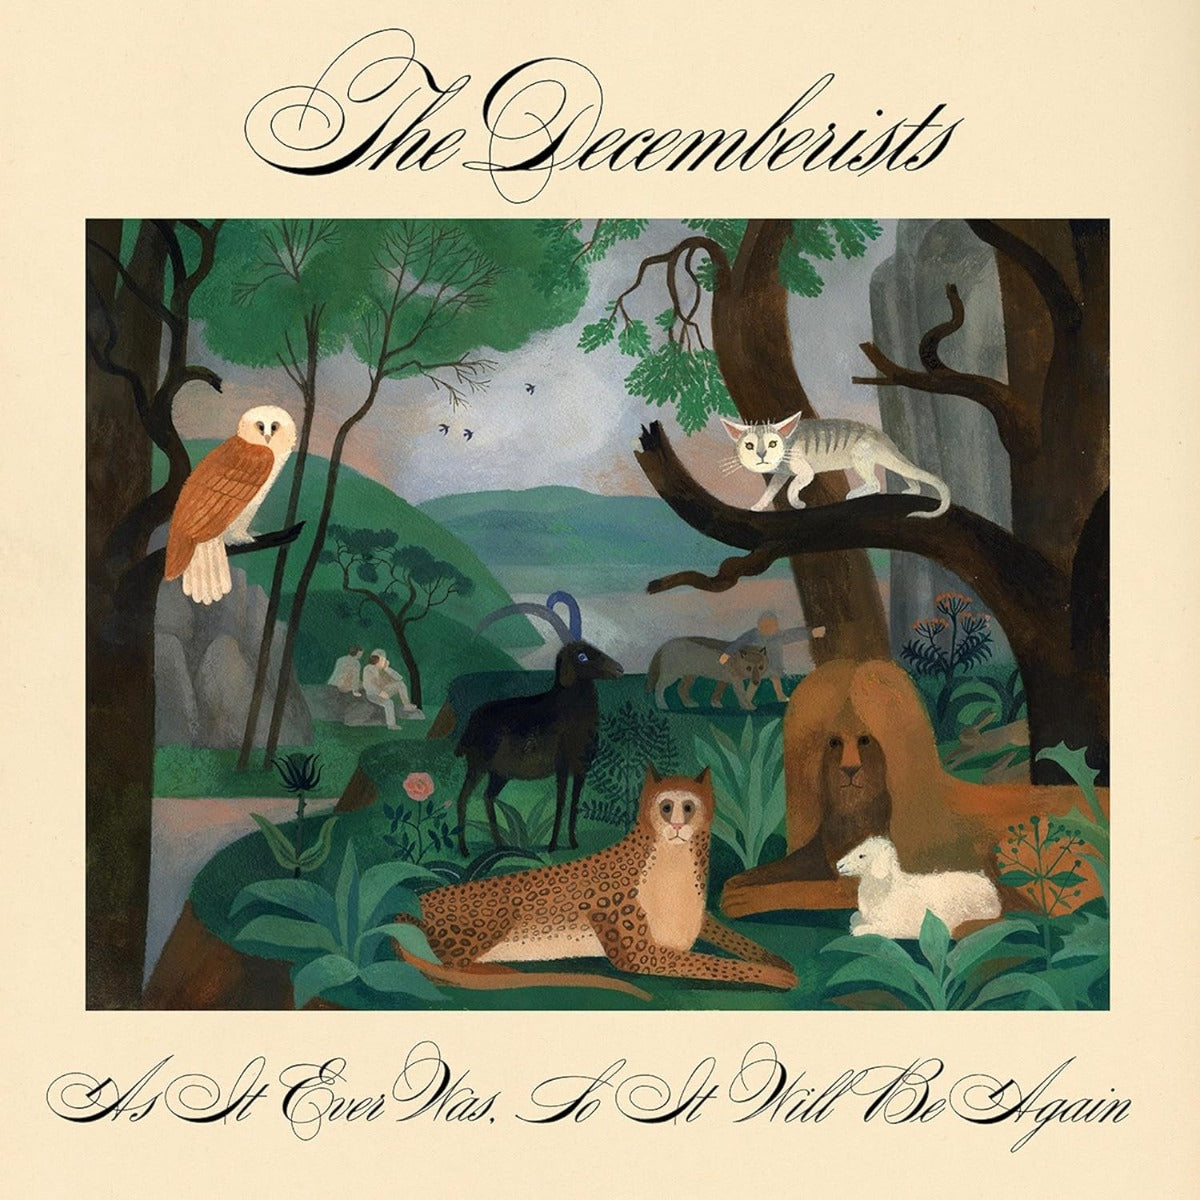 The Decemberists | As It Ever Was, So It Will Be Again (2 Lp's) | Vinyl